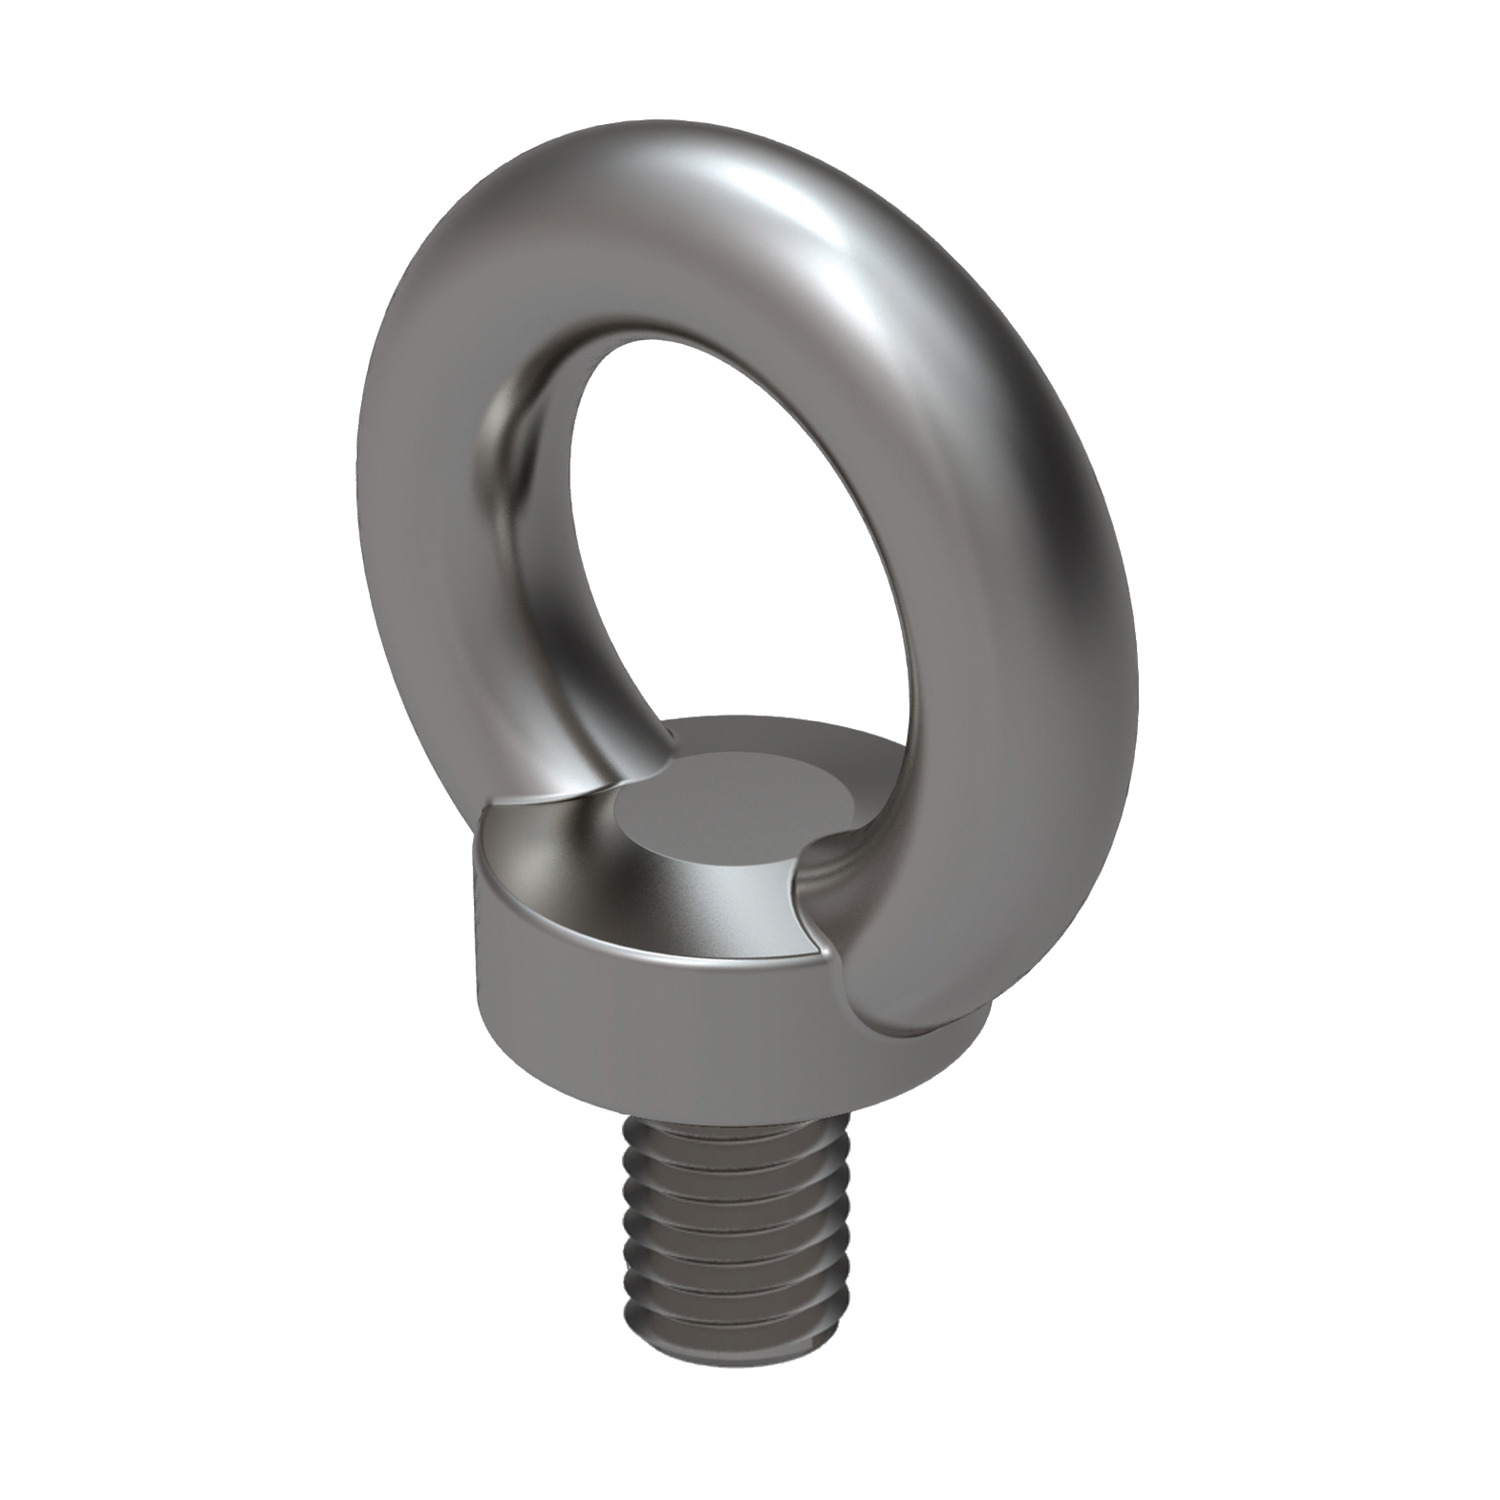 Steel Male Lifting Eye Bolts Male lifting bolt made from zinc plated, annealed forged steal with machined contact face. DIN 580 compliant. We offer also inch versions as standard.